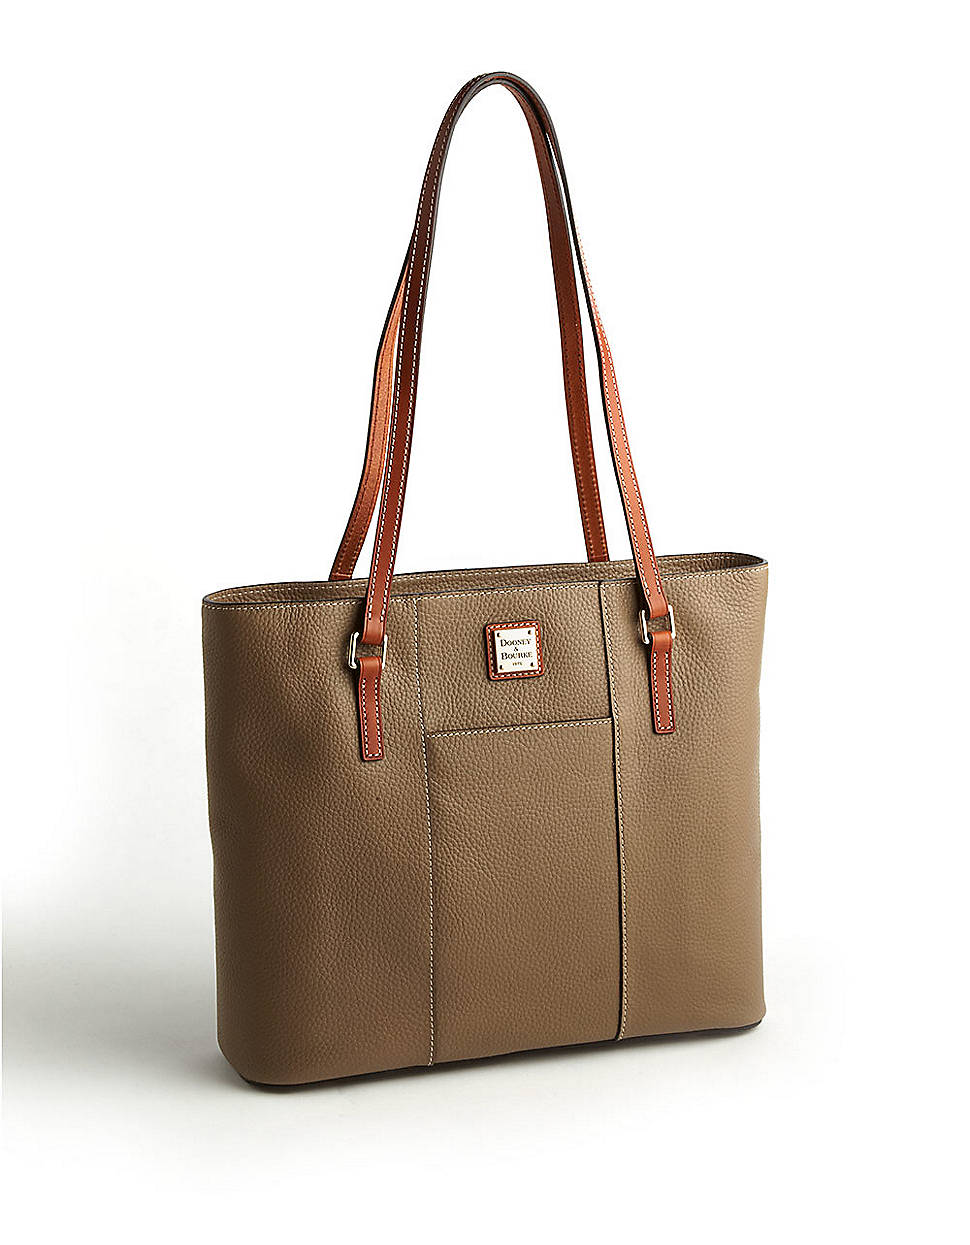 Dooney & Bourke Lexington Leather Shopper Tote Bag in Brown (taupe) | Lyst